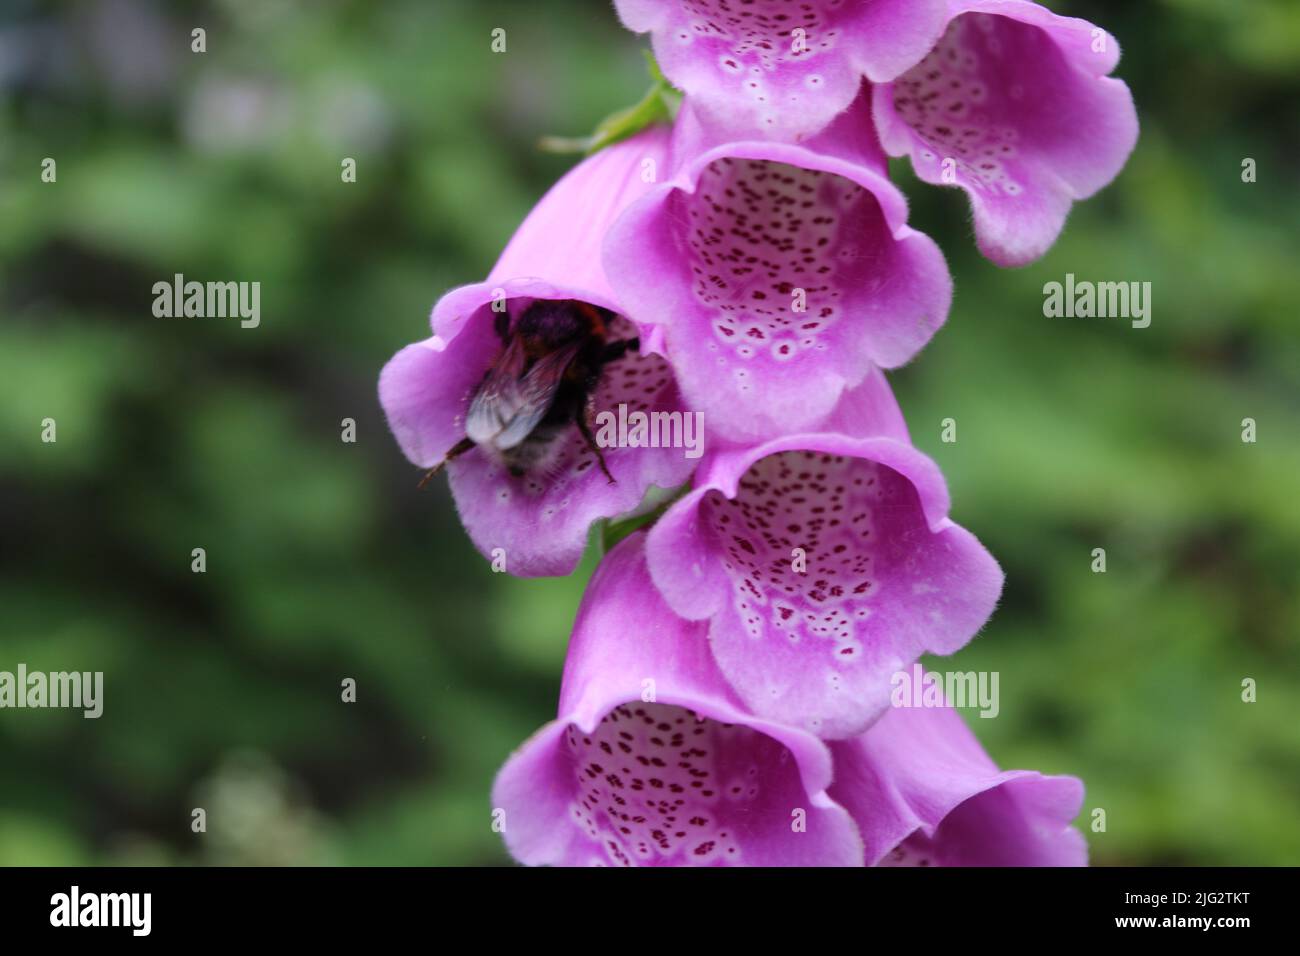 An extreme closeup using a macro lens. The shot is of a bee pollenating a pink hollyhock flower in a garden. The detail of the petals can be seen. Stock Photo